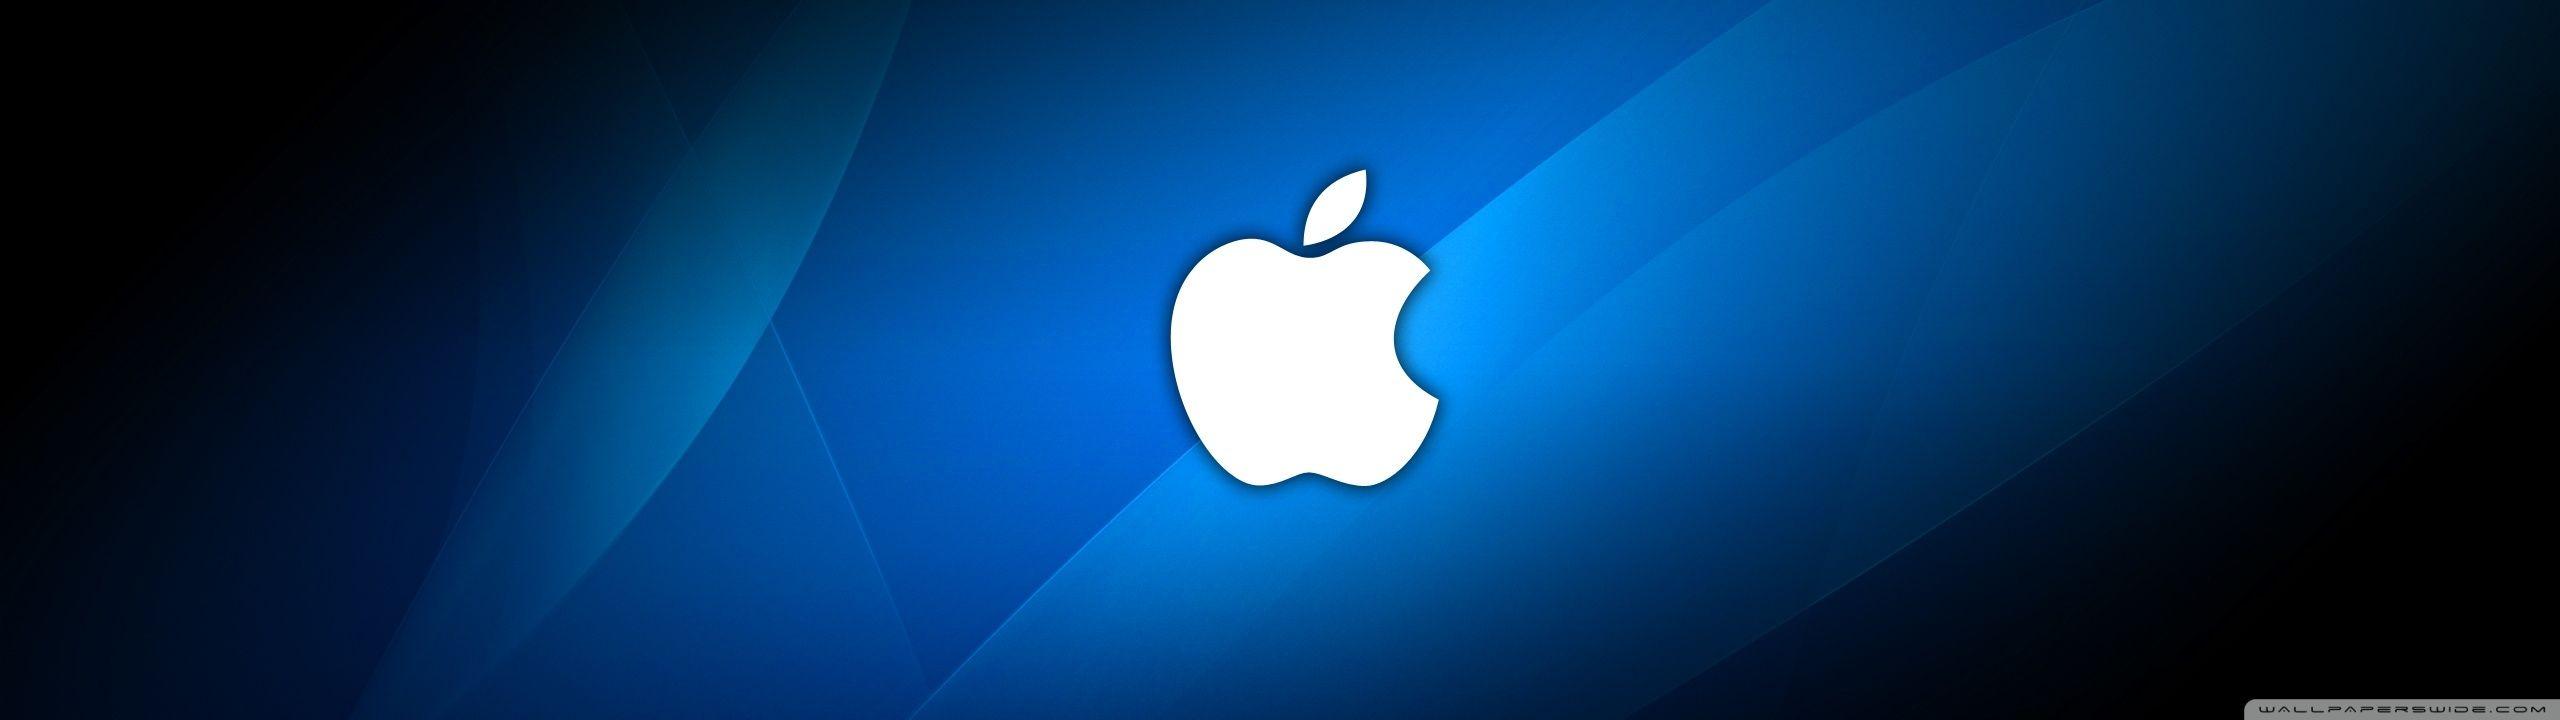 Apple Dual Monitor Wallpapers - Top Free Apple Dual Monitor Backgrounds ...